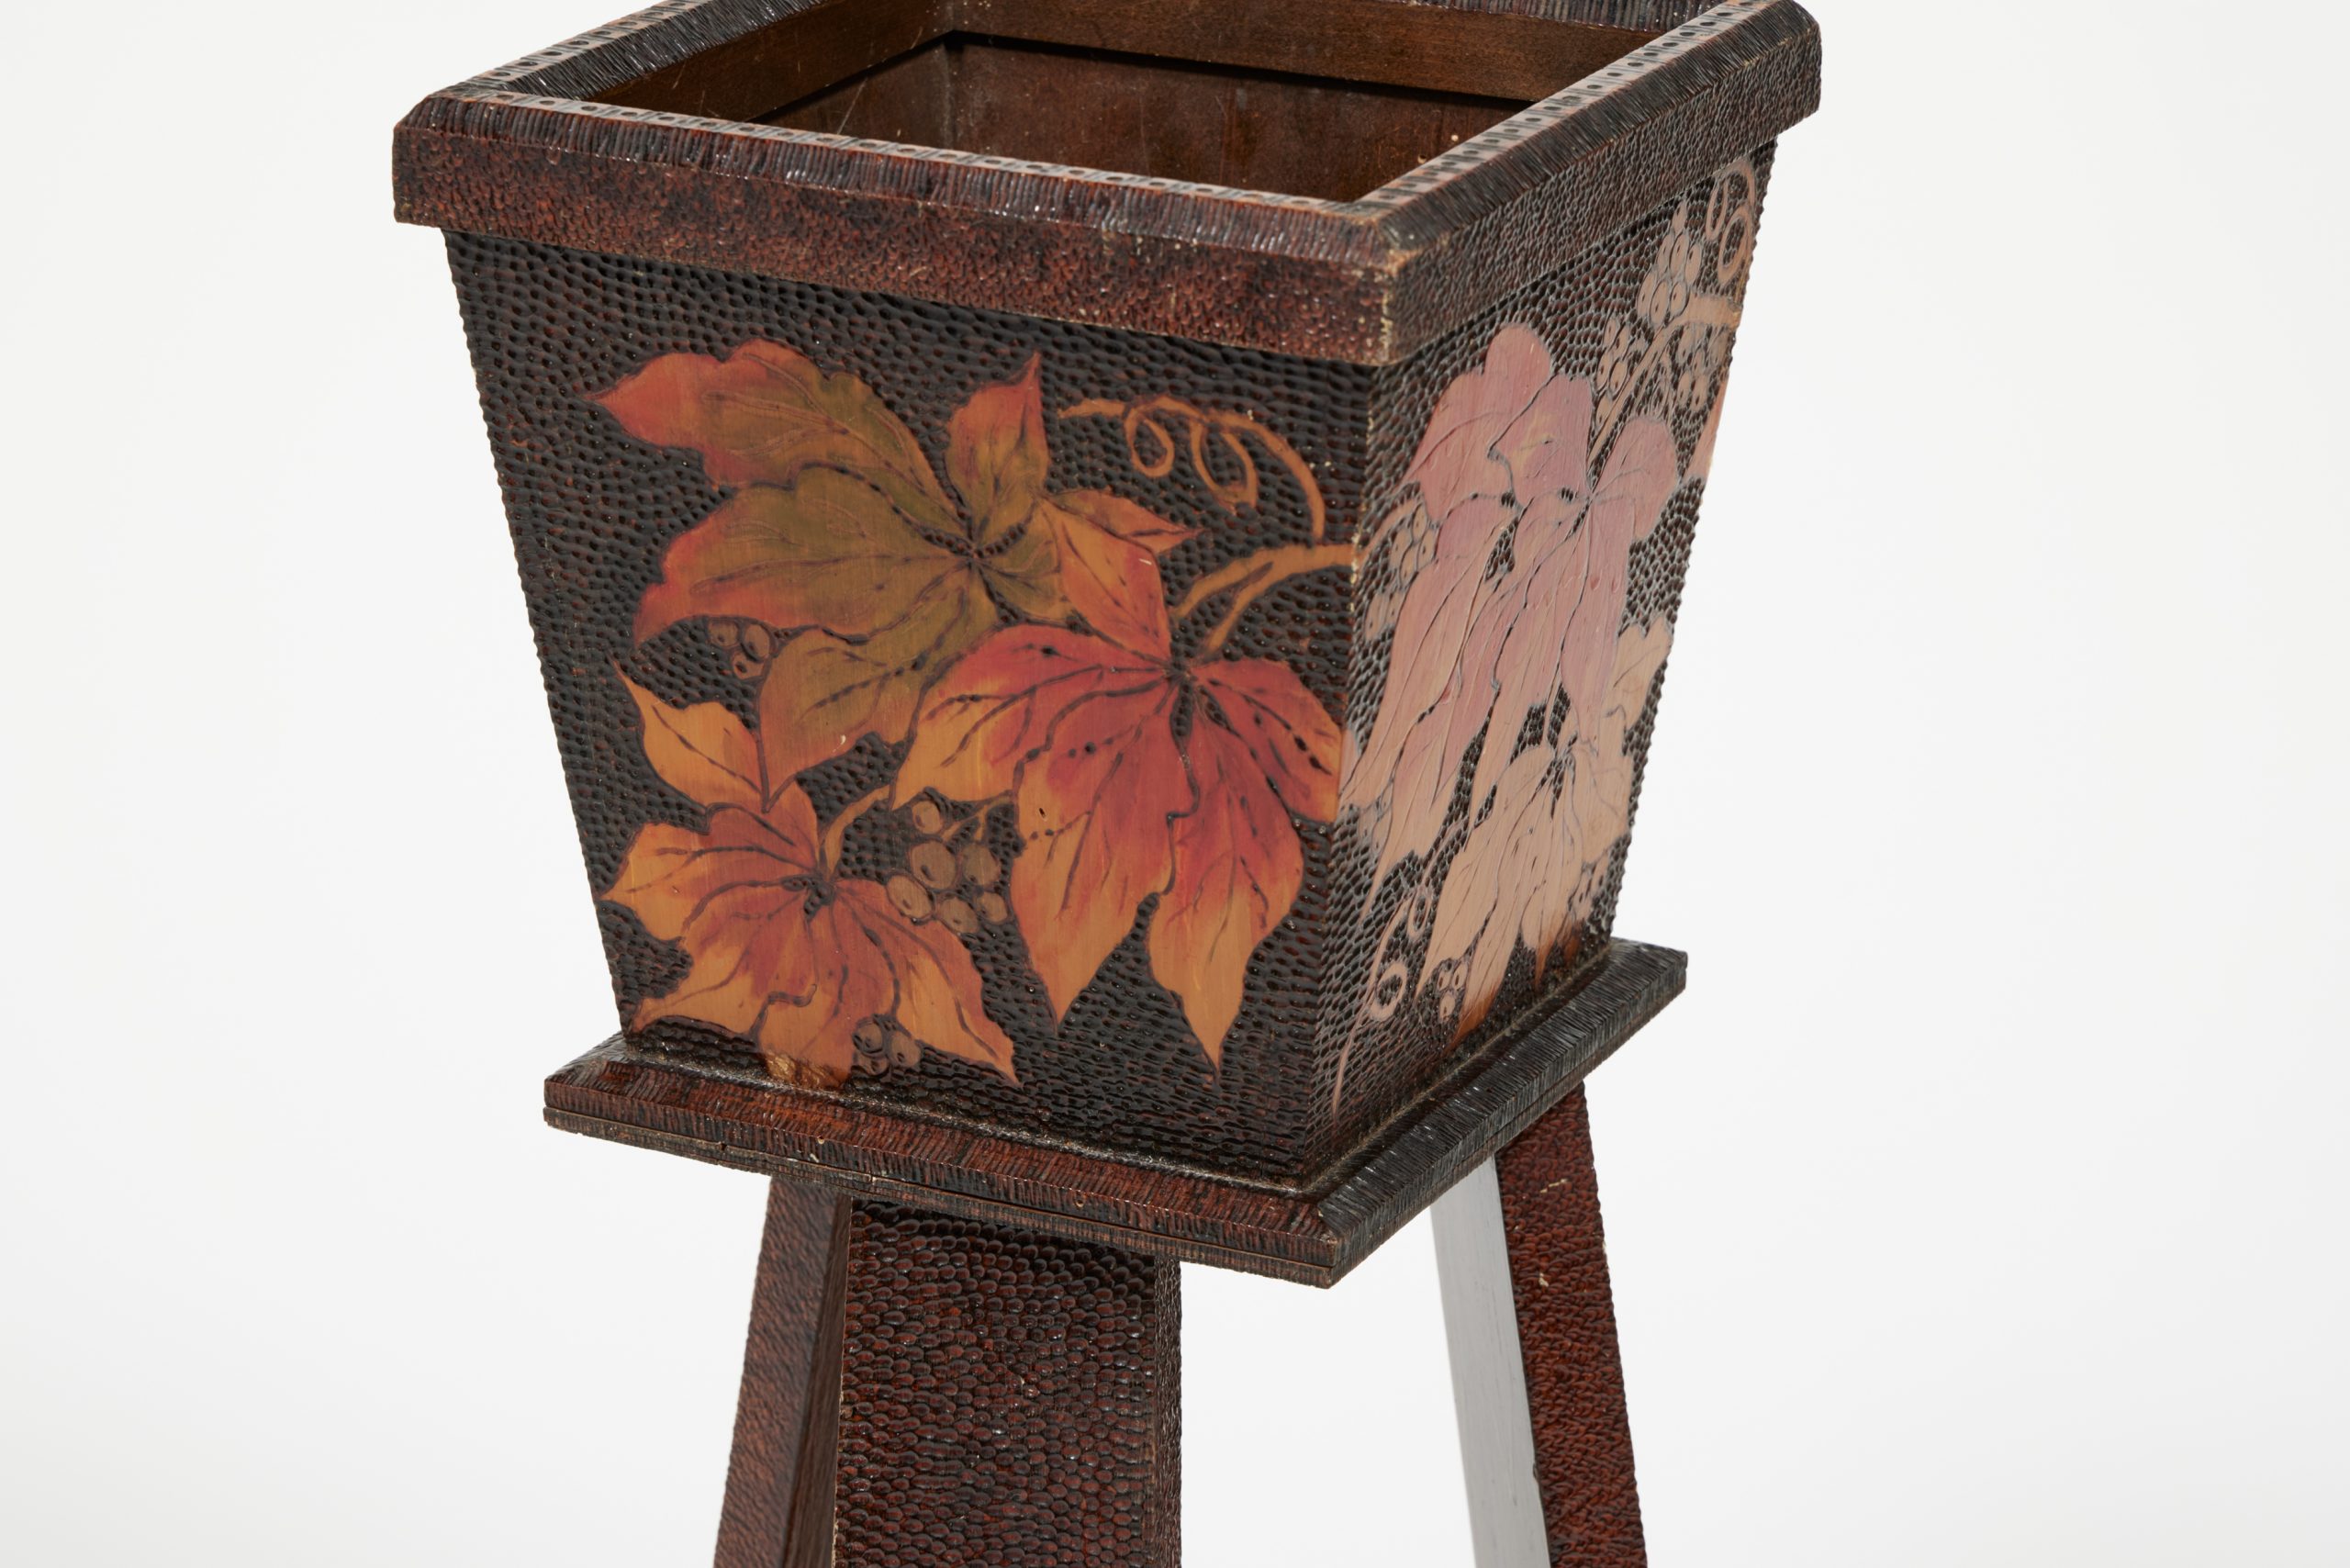 Holder of plant stand with Virginia creeper vines burned into the wood